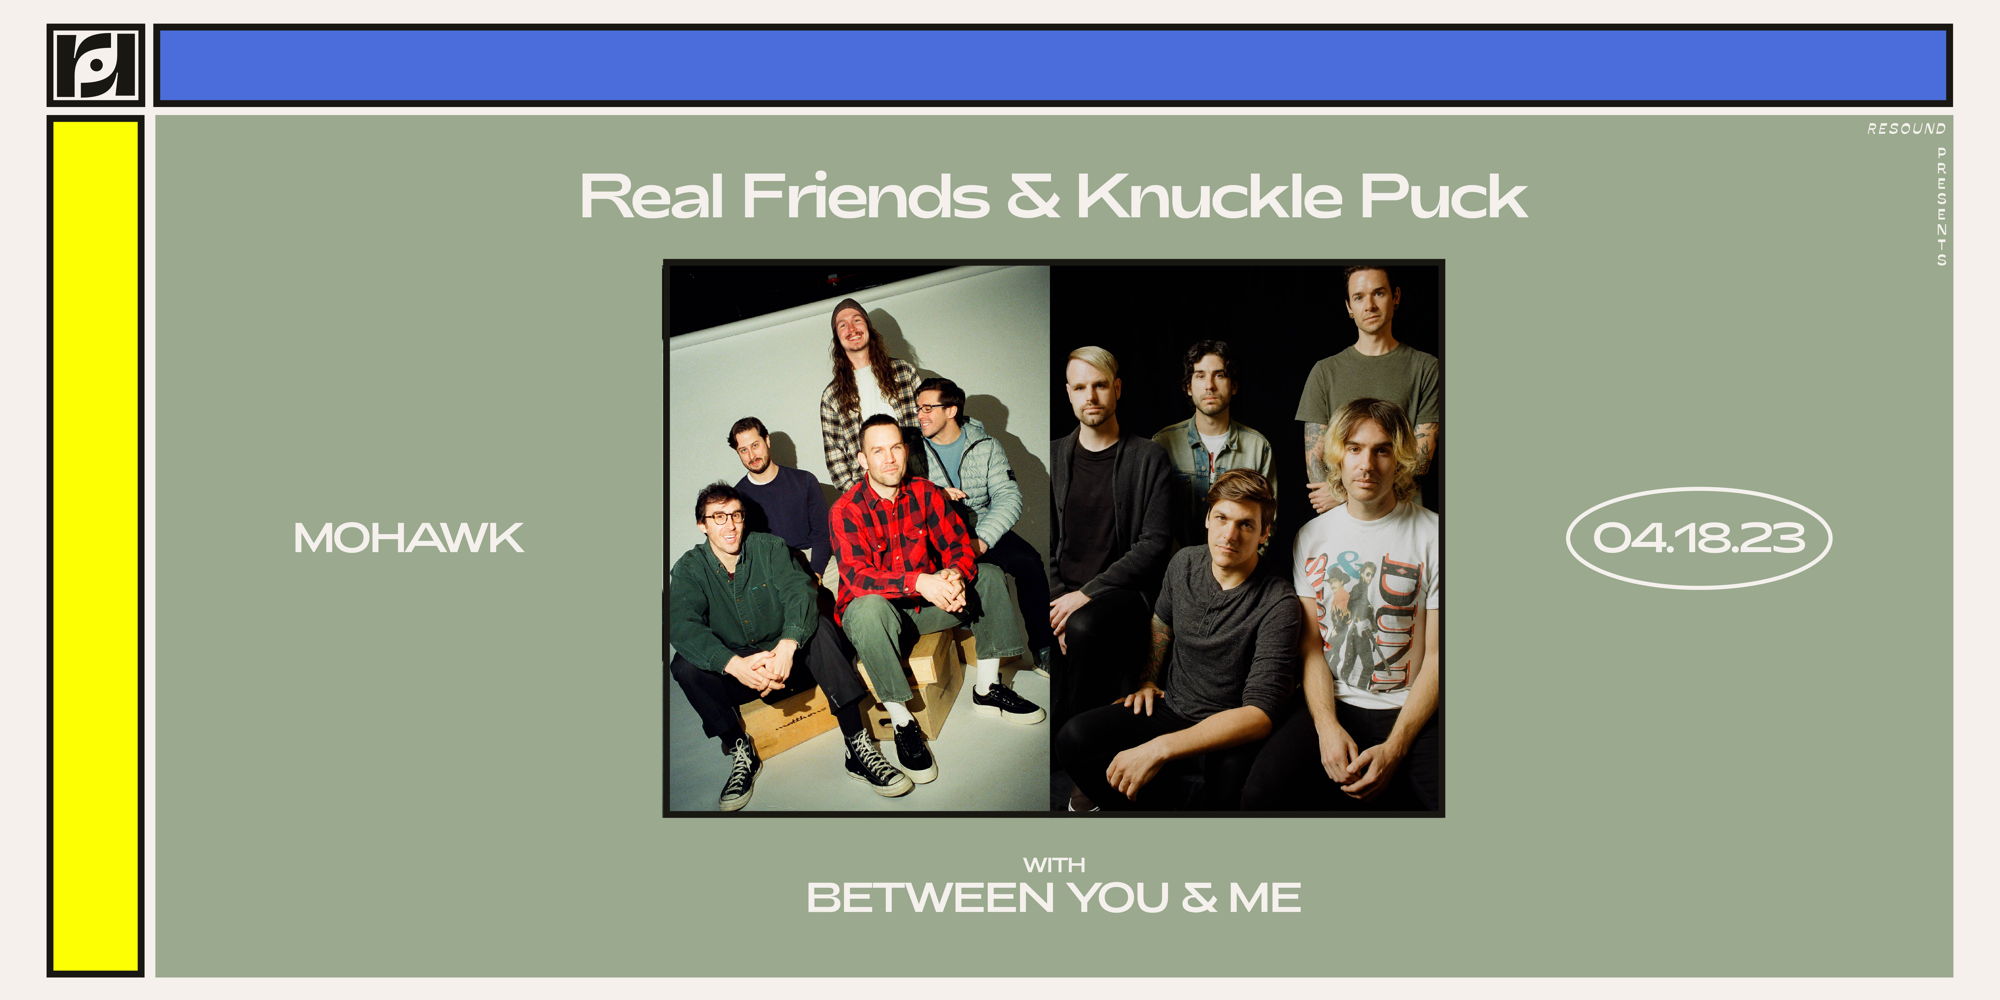 Resound Presents: Real Friends & Knuckle Puck w/ Between You & Me at Mohawk on 4/18/23 promotional image